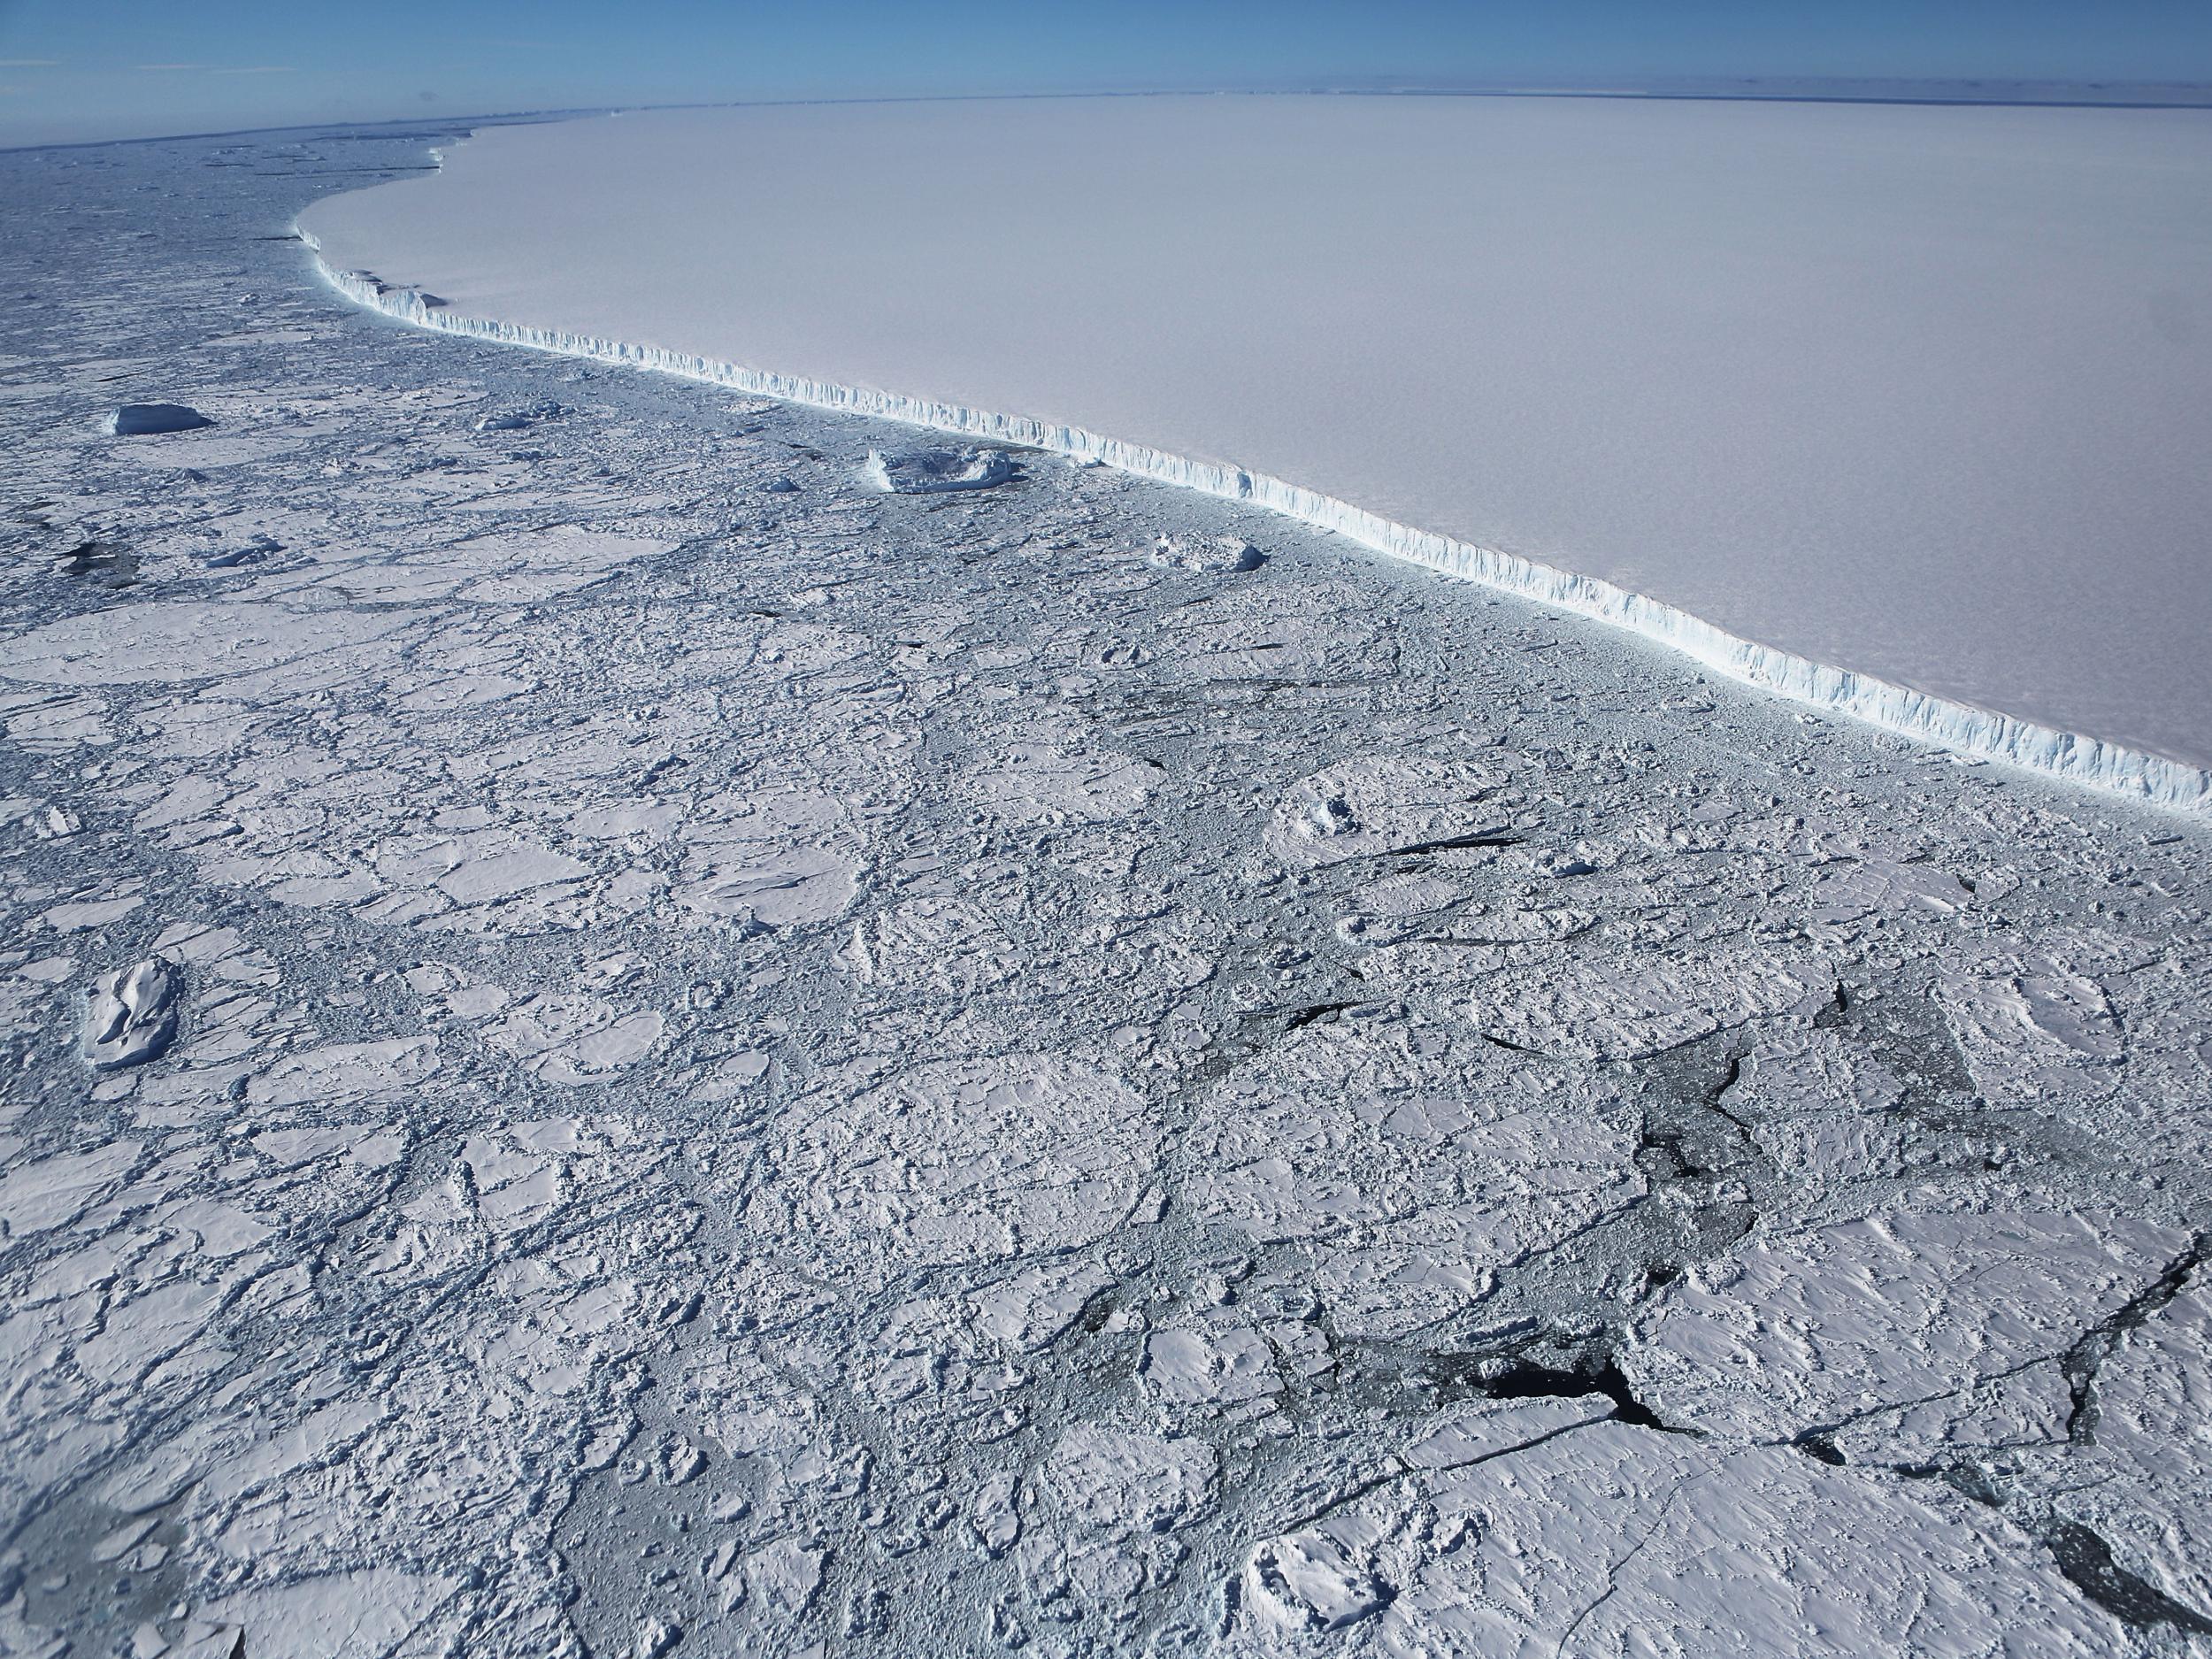 Even strong reduction of greenhouse gases may not prevent the collapse of the West Antarctic ice sheet